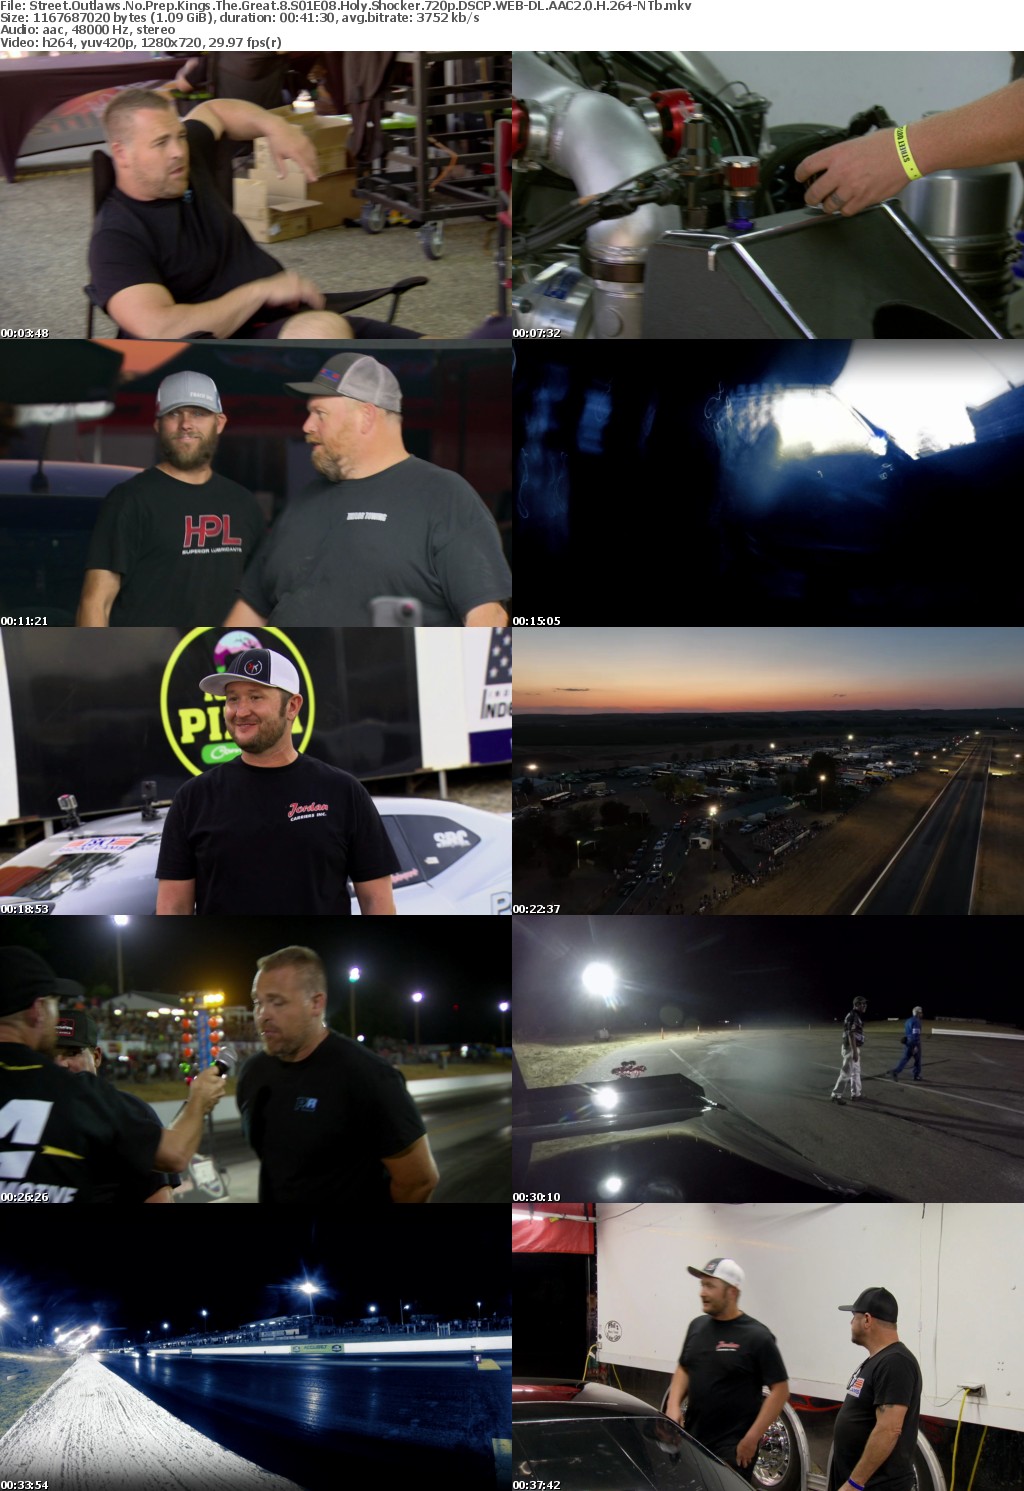 Street Outlaws No Prep Kings The Great 8 S01E08 Holy Shocker 720p DSCP WEB-DL AAC2 0 H 264-NTb